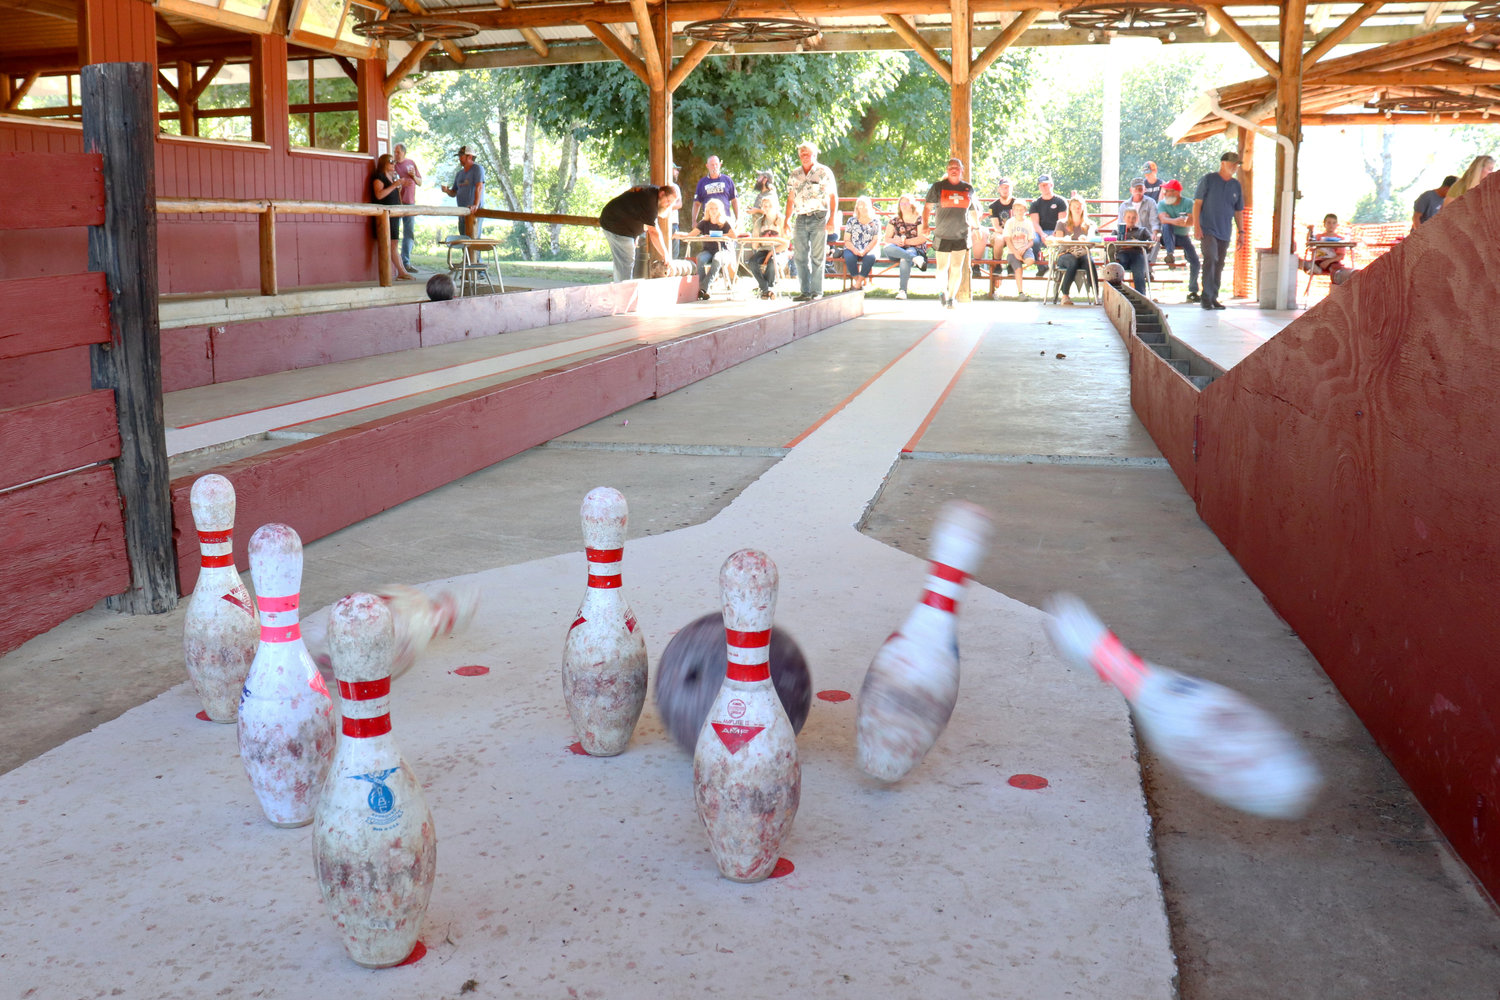 A bowling ball strikes pins during an outdoor European nine-pin bowling tournament held at the Lewis-Pacific Swiss Society Oktoberfest in Frances on Saturday. Cash prizes were on the line for the top bowlers, with the first perfect score of the day winning $500.